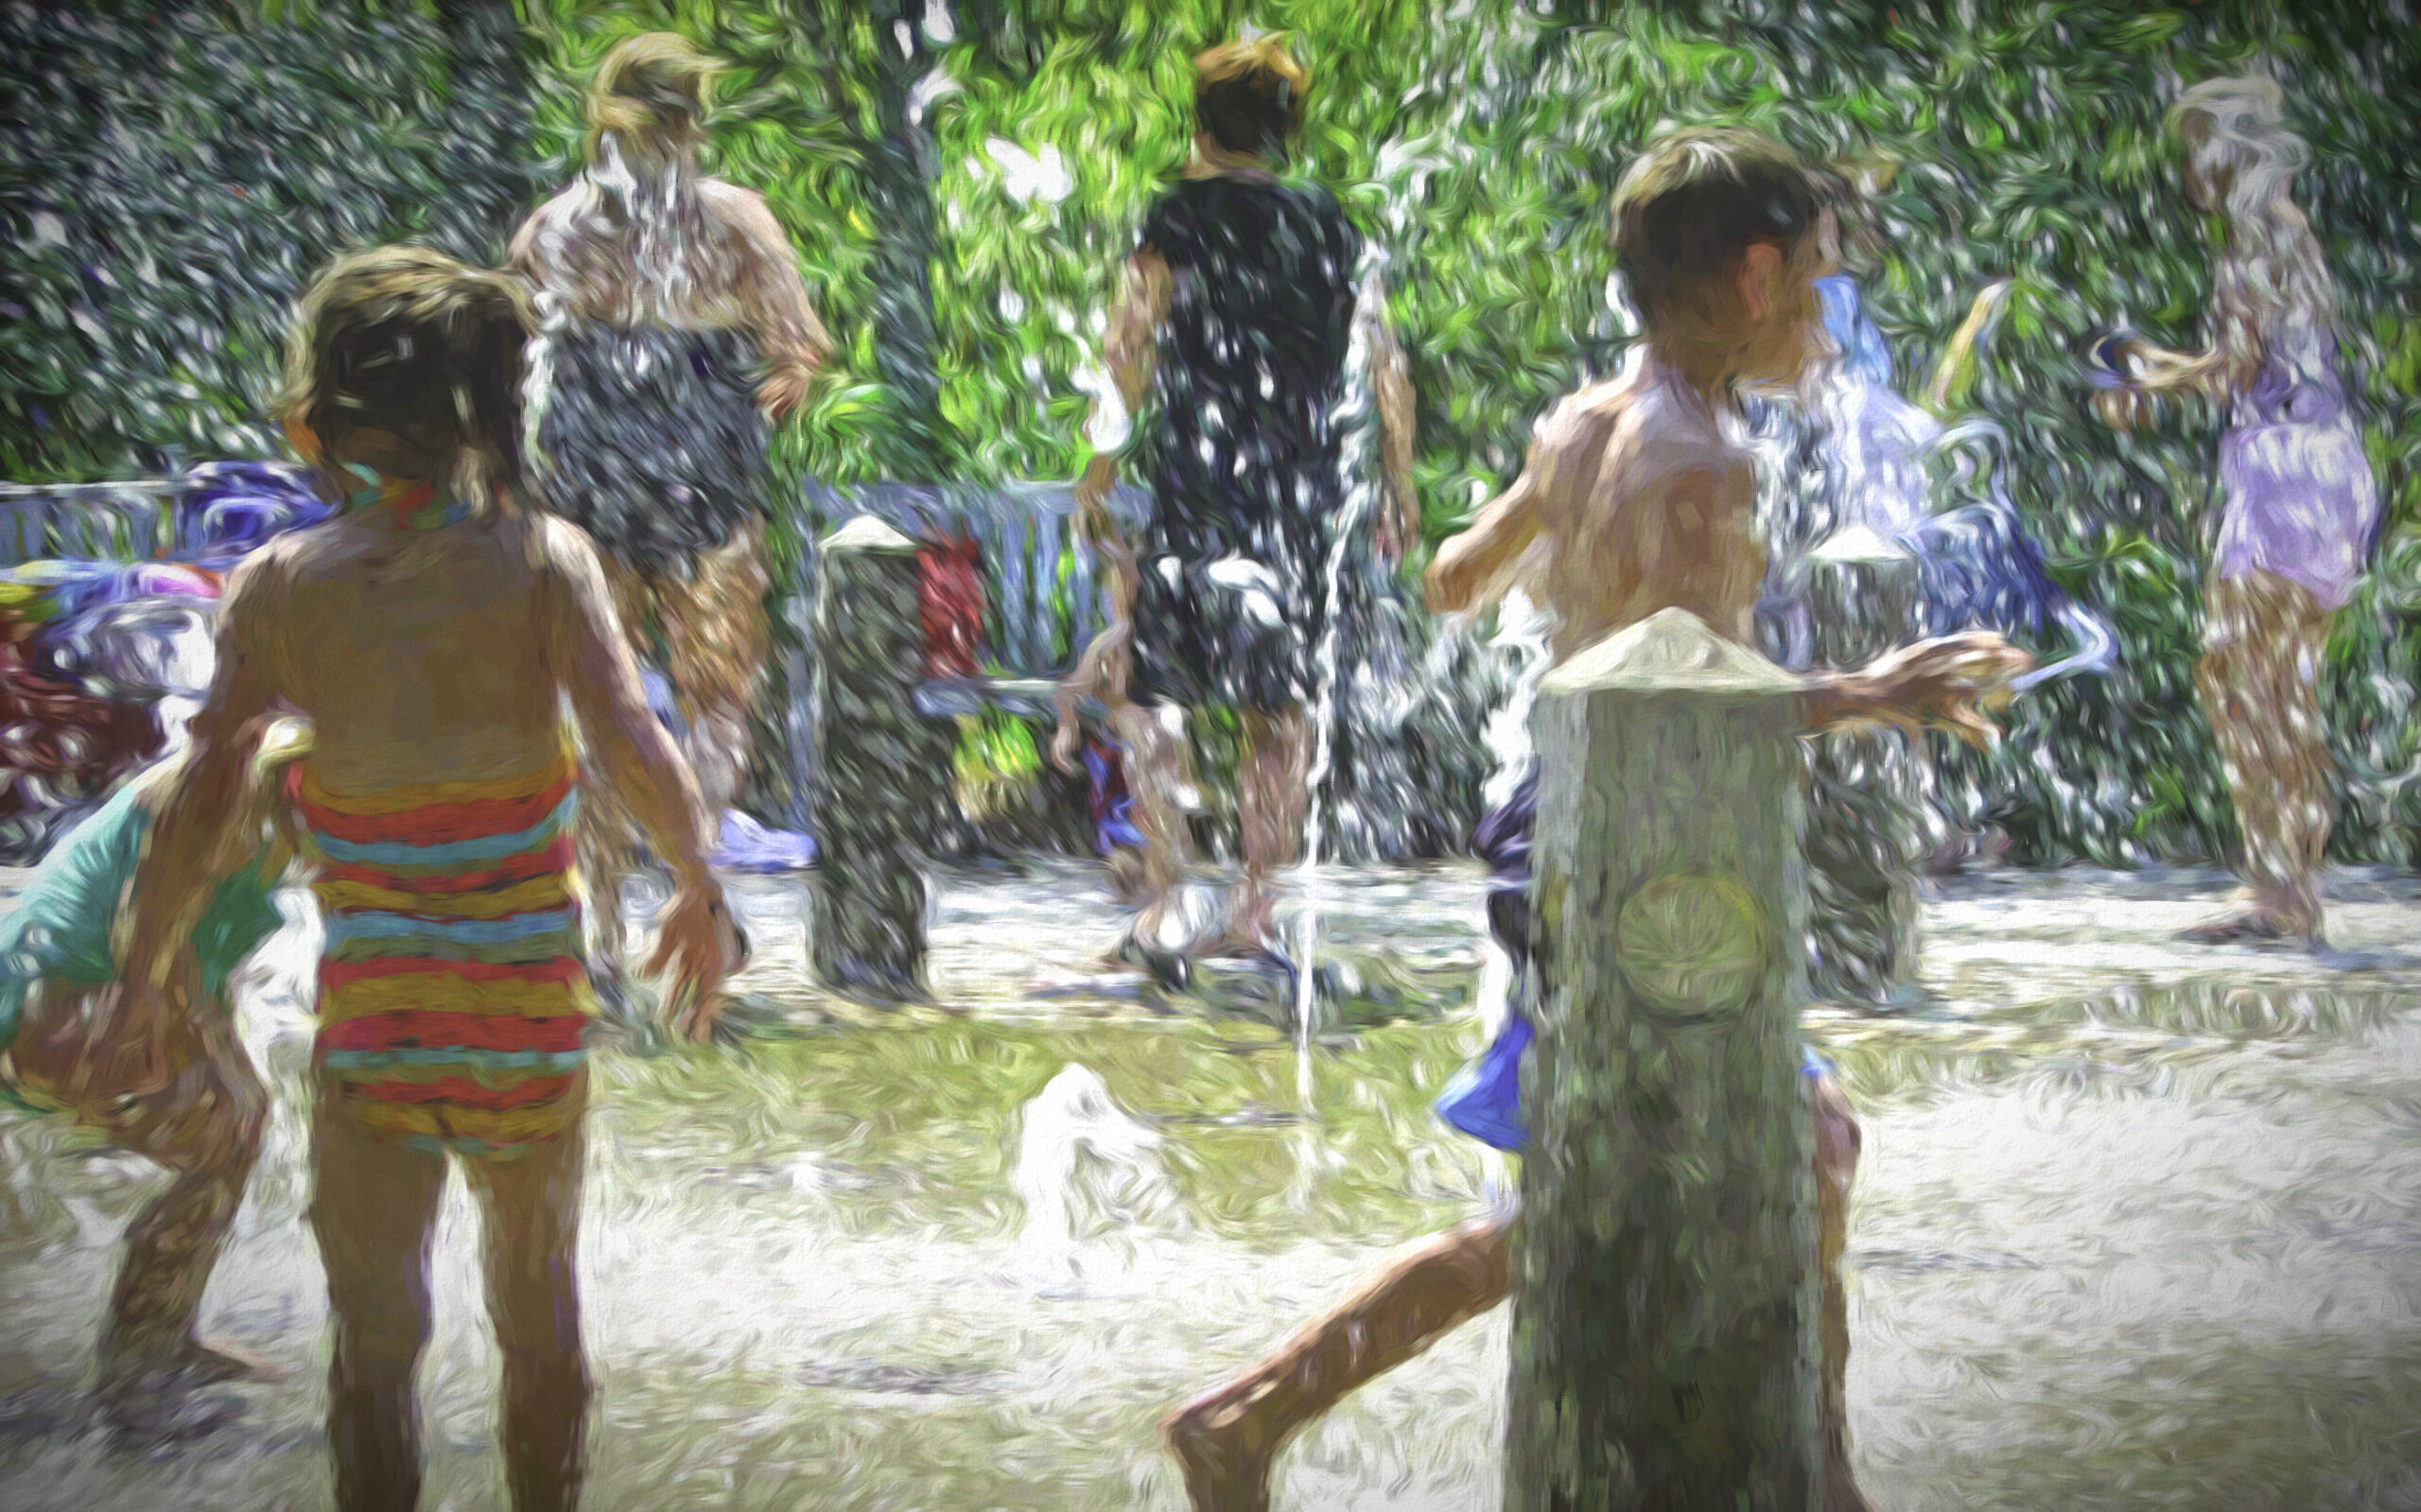 Children playing in a water park in South Carolina